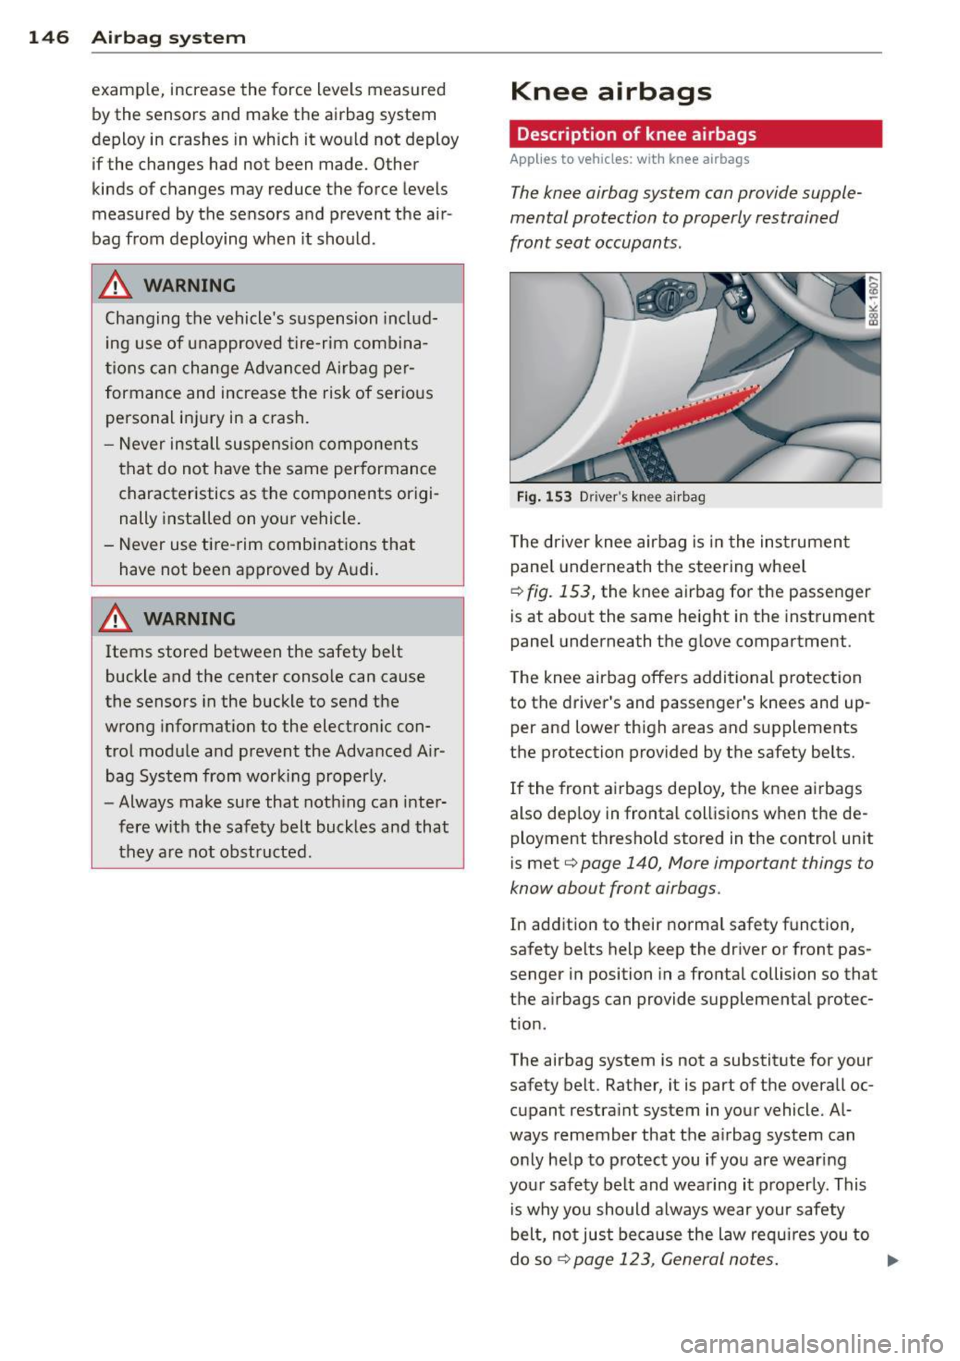 AUDI RS5 CABRIOLET 2015  Owners Manual 146  Airbag system 
example,  increase the  force  levels  measured 
by the  sensors and  make the  airbag  system 
deploy  in  crashes in which  it  would  not  deploy  if the  changes had not  been 